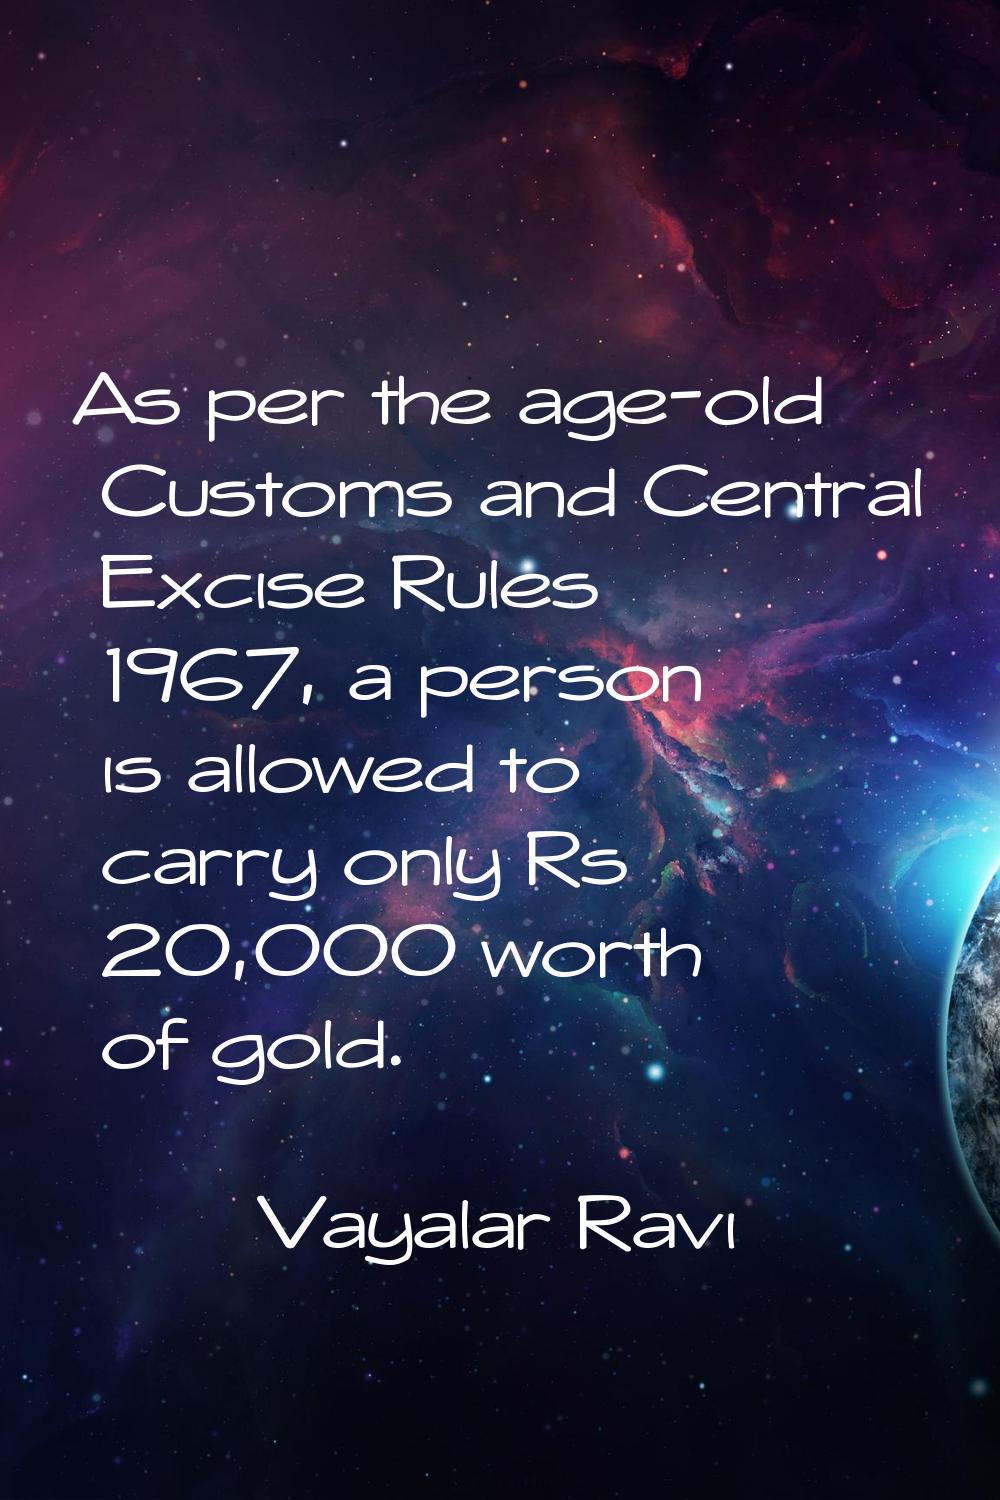 As per the age-old Customs and Central Excise Rules 1967, a person is allowed to carry only Rs 20,0